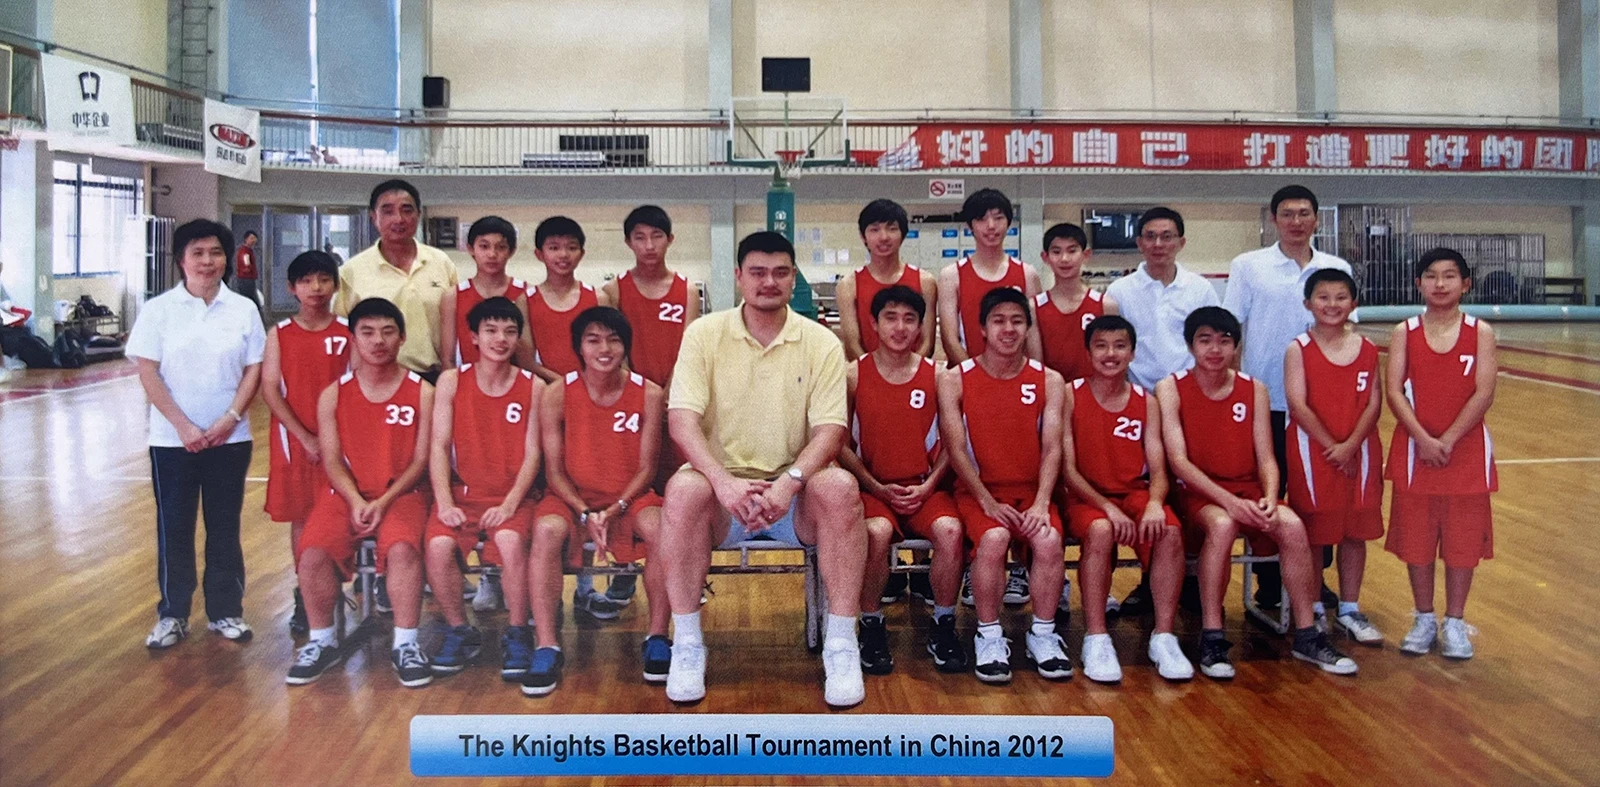  Knights Basketball Tournament in China 2012